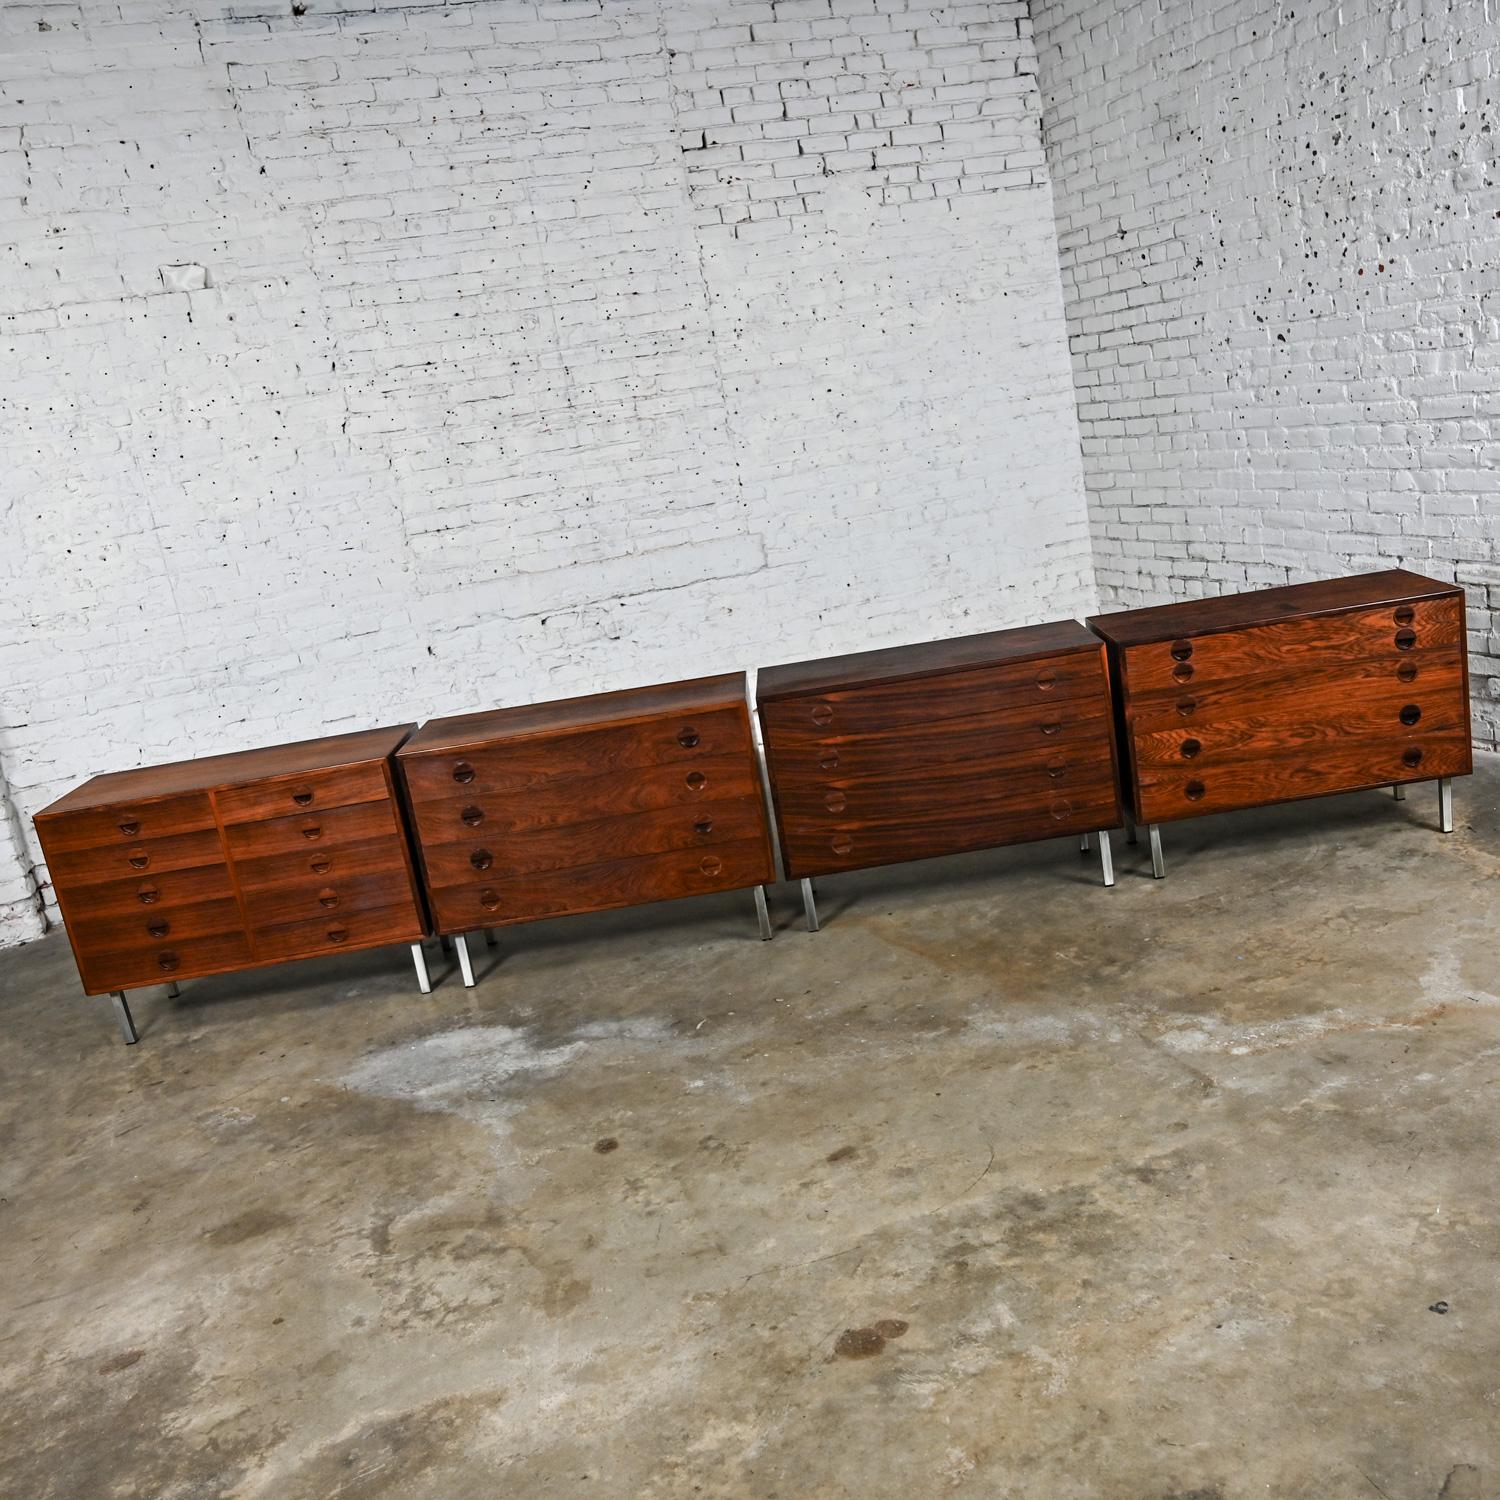 4 Scandinavian Modern Rosewood Cabinets by Rud Thygesen & Johnny Sorensen for HG In Good Condition For Sale In Topeka, KS